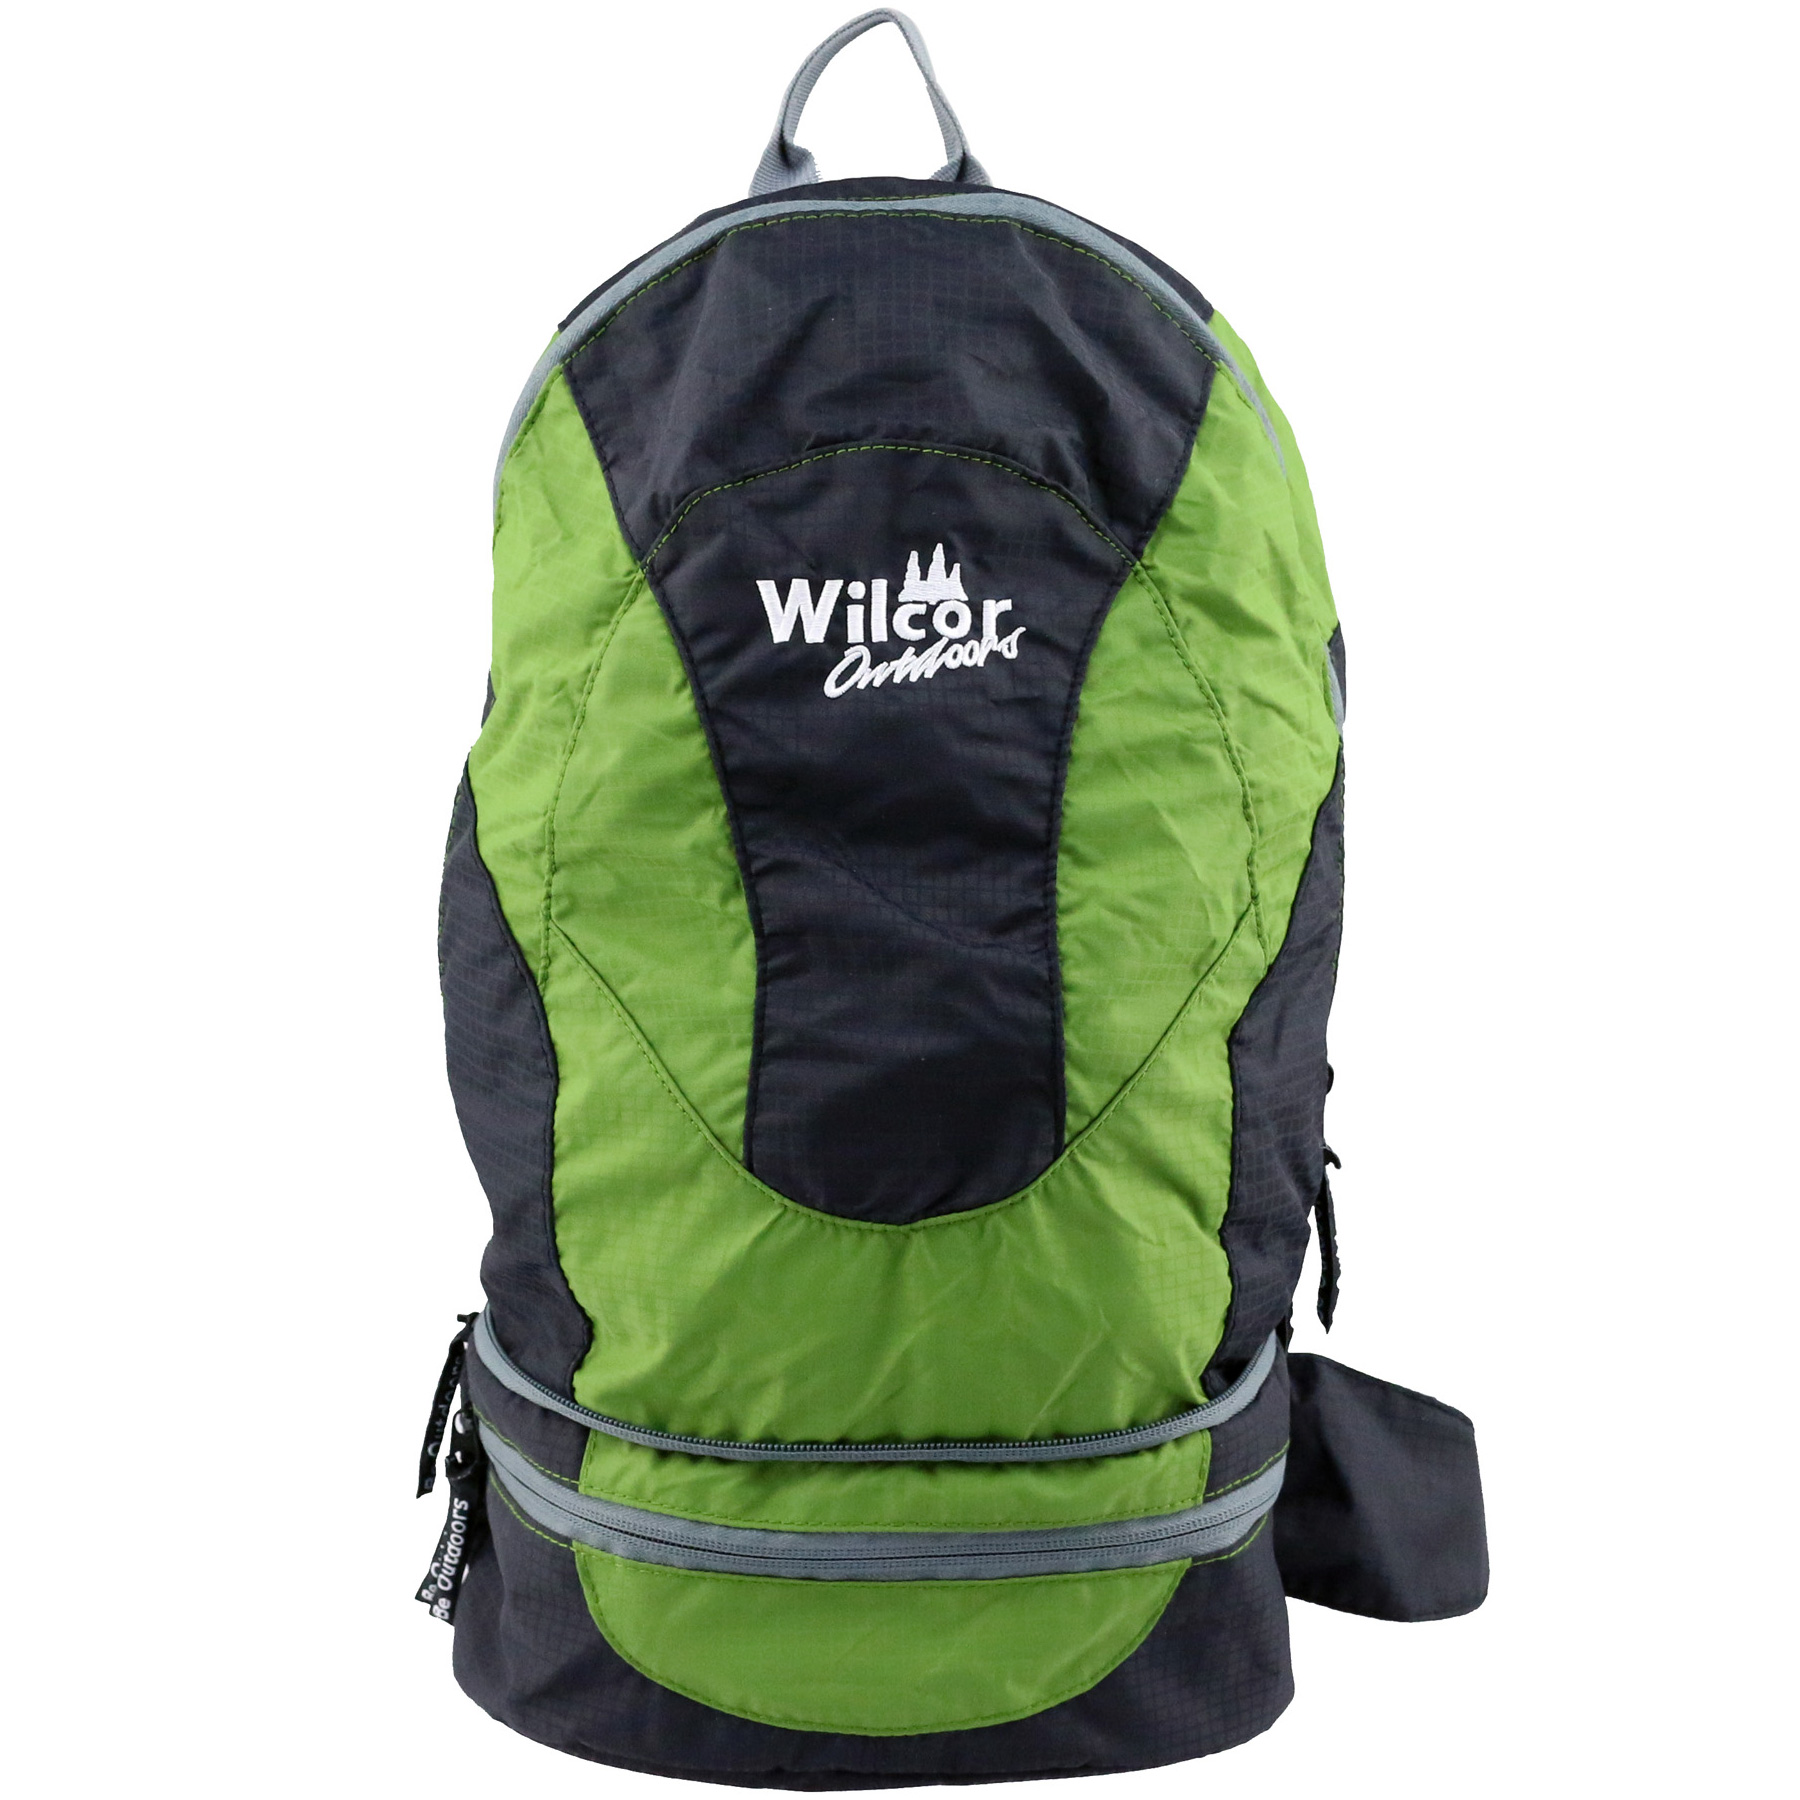 https://wilcor.net/productimages/cmp0506_ultra_compact_backpack_green.jpg